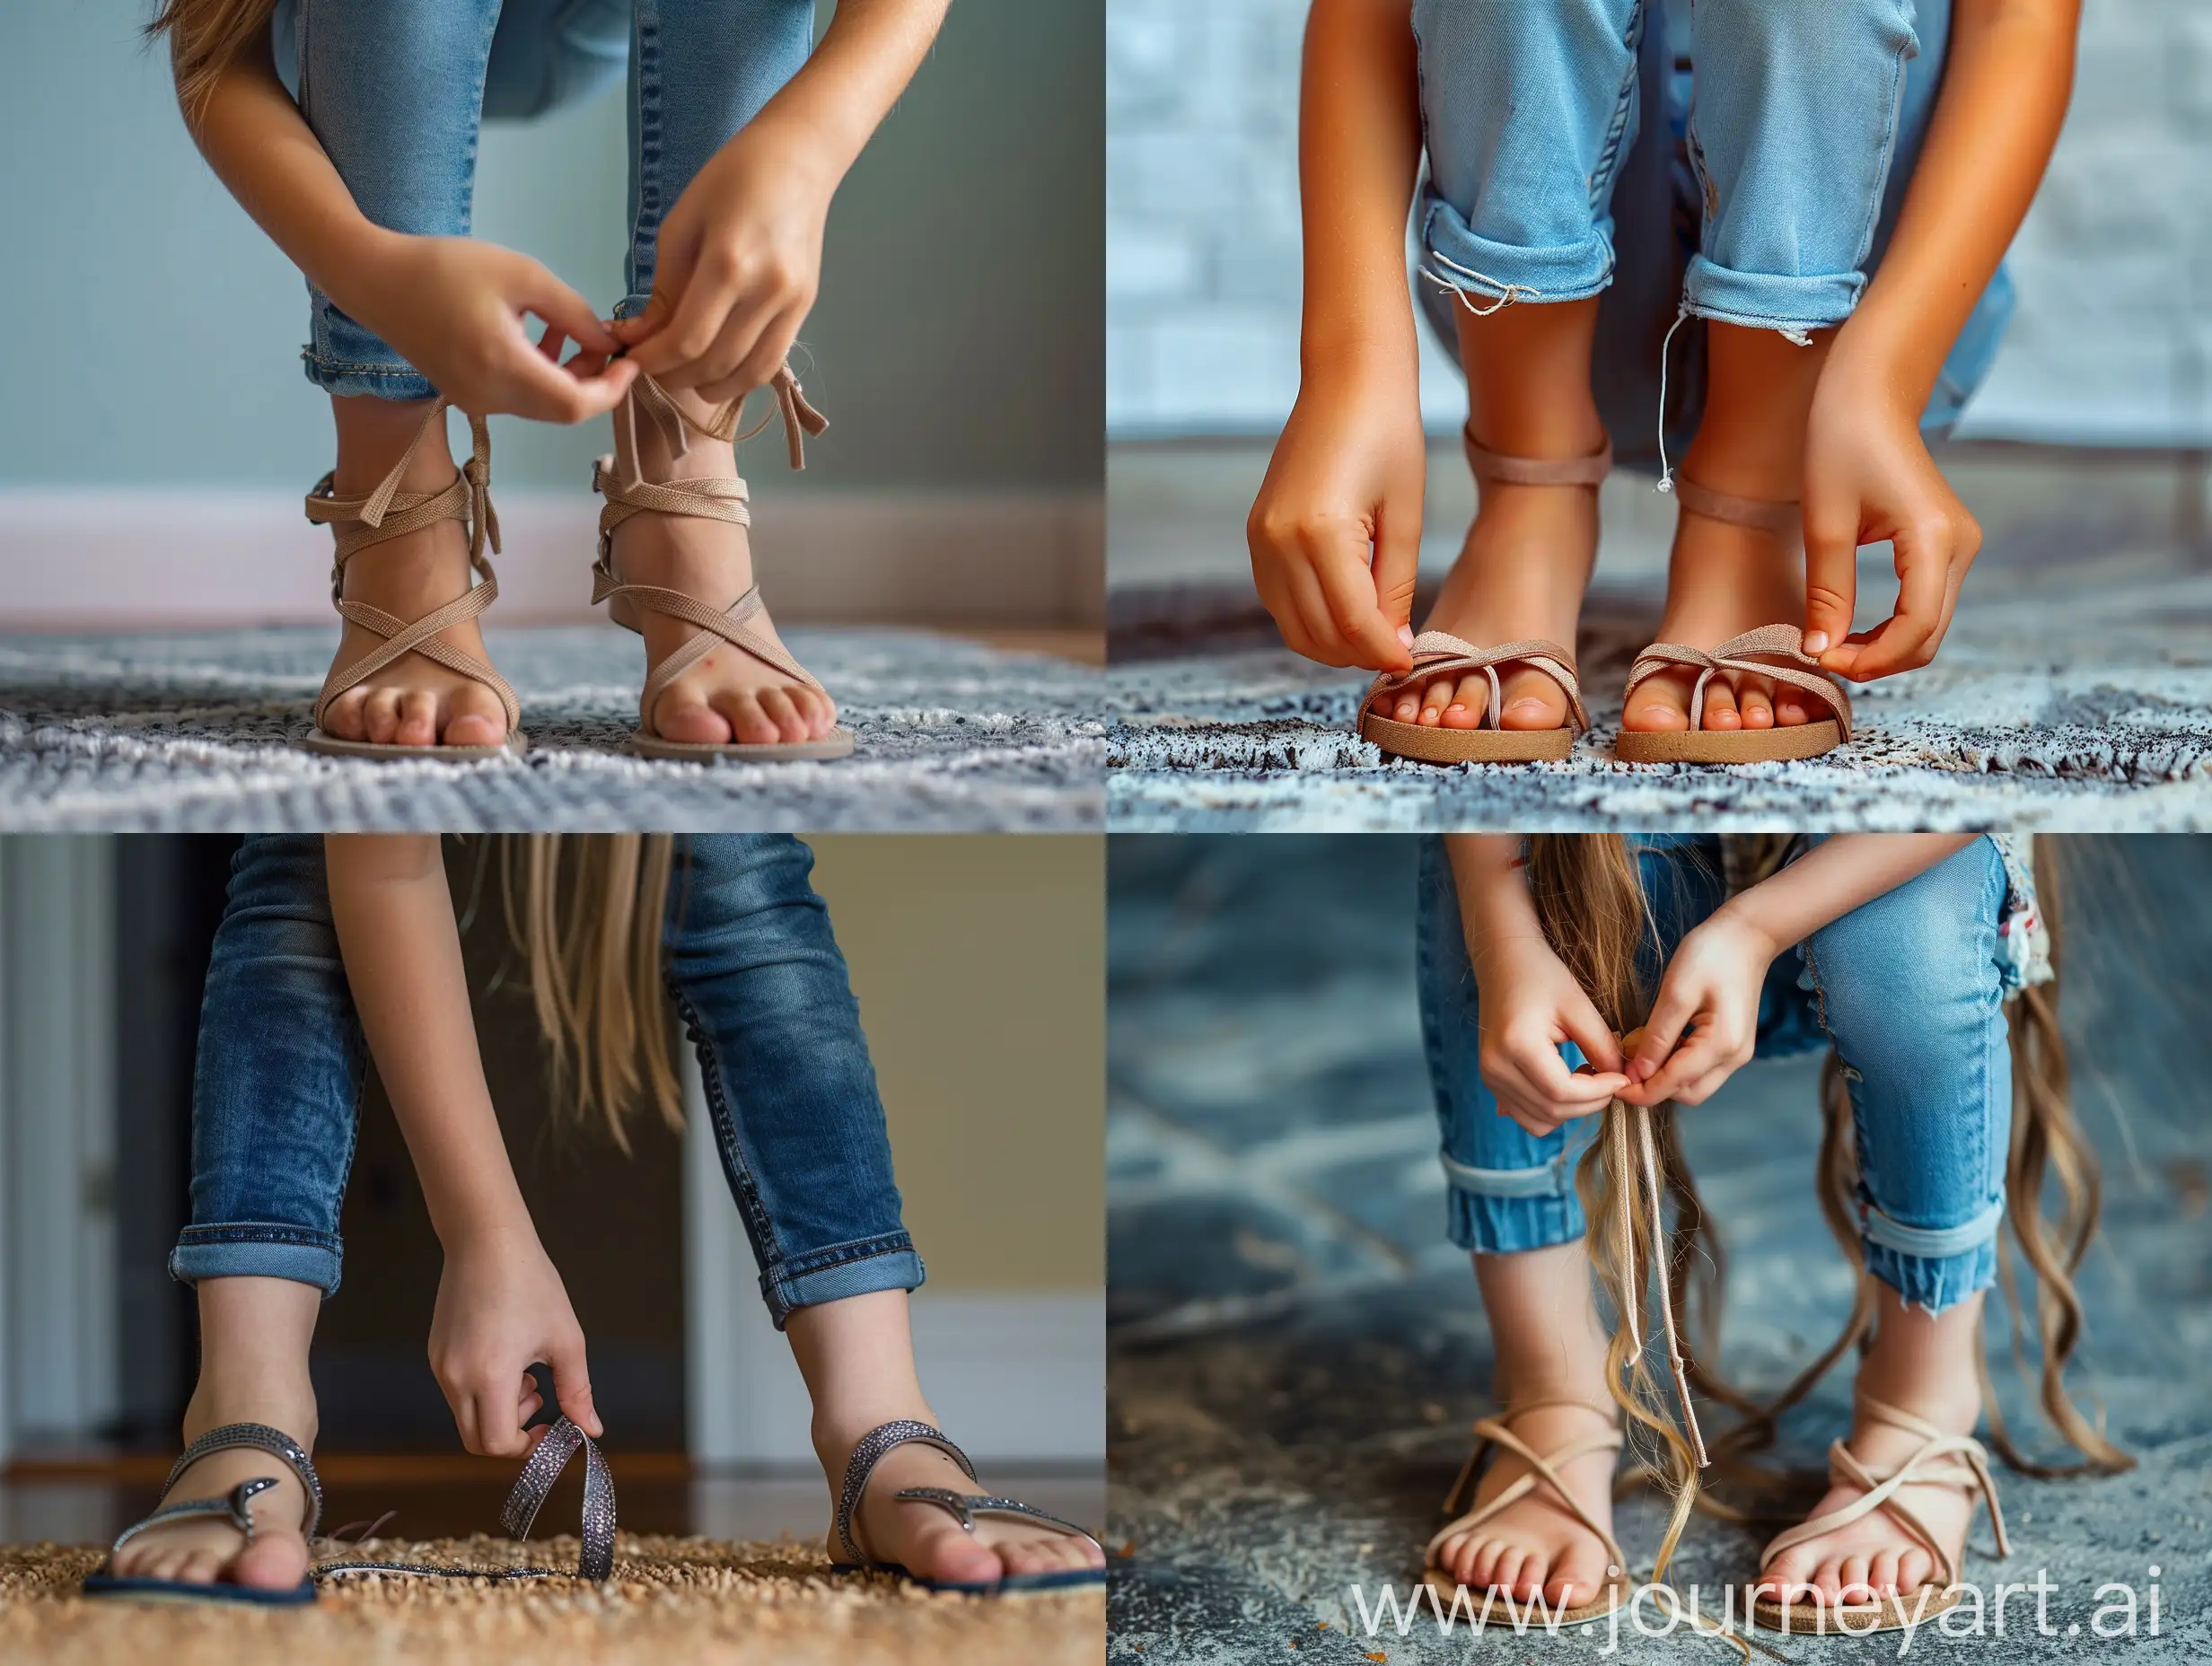 Professional photo: Close up shot of a young girl putting on sandals, skinny jeans, close up of feet